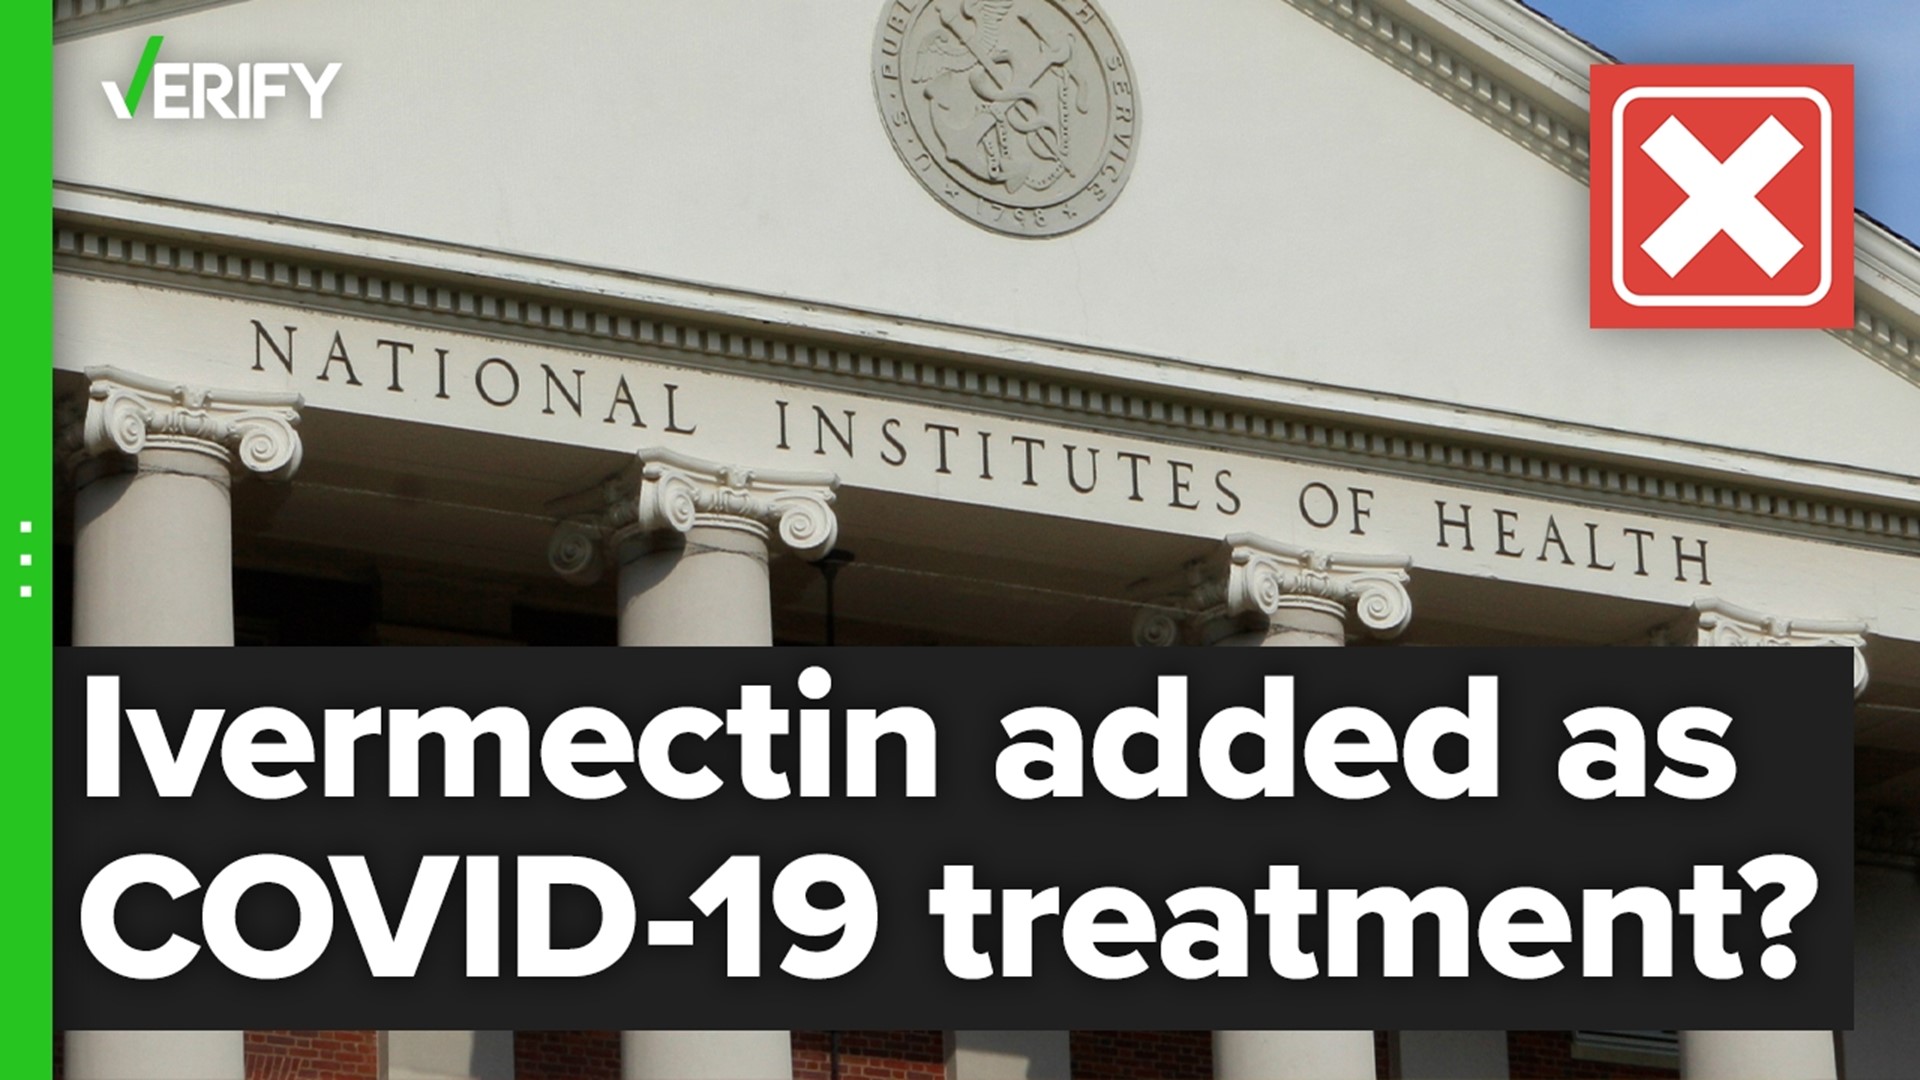 The NIH website does not list ivermectin as an approved antiviral drug therapy for treating COVID-19, as viral social media posts claim.